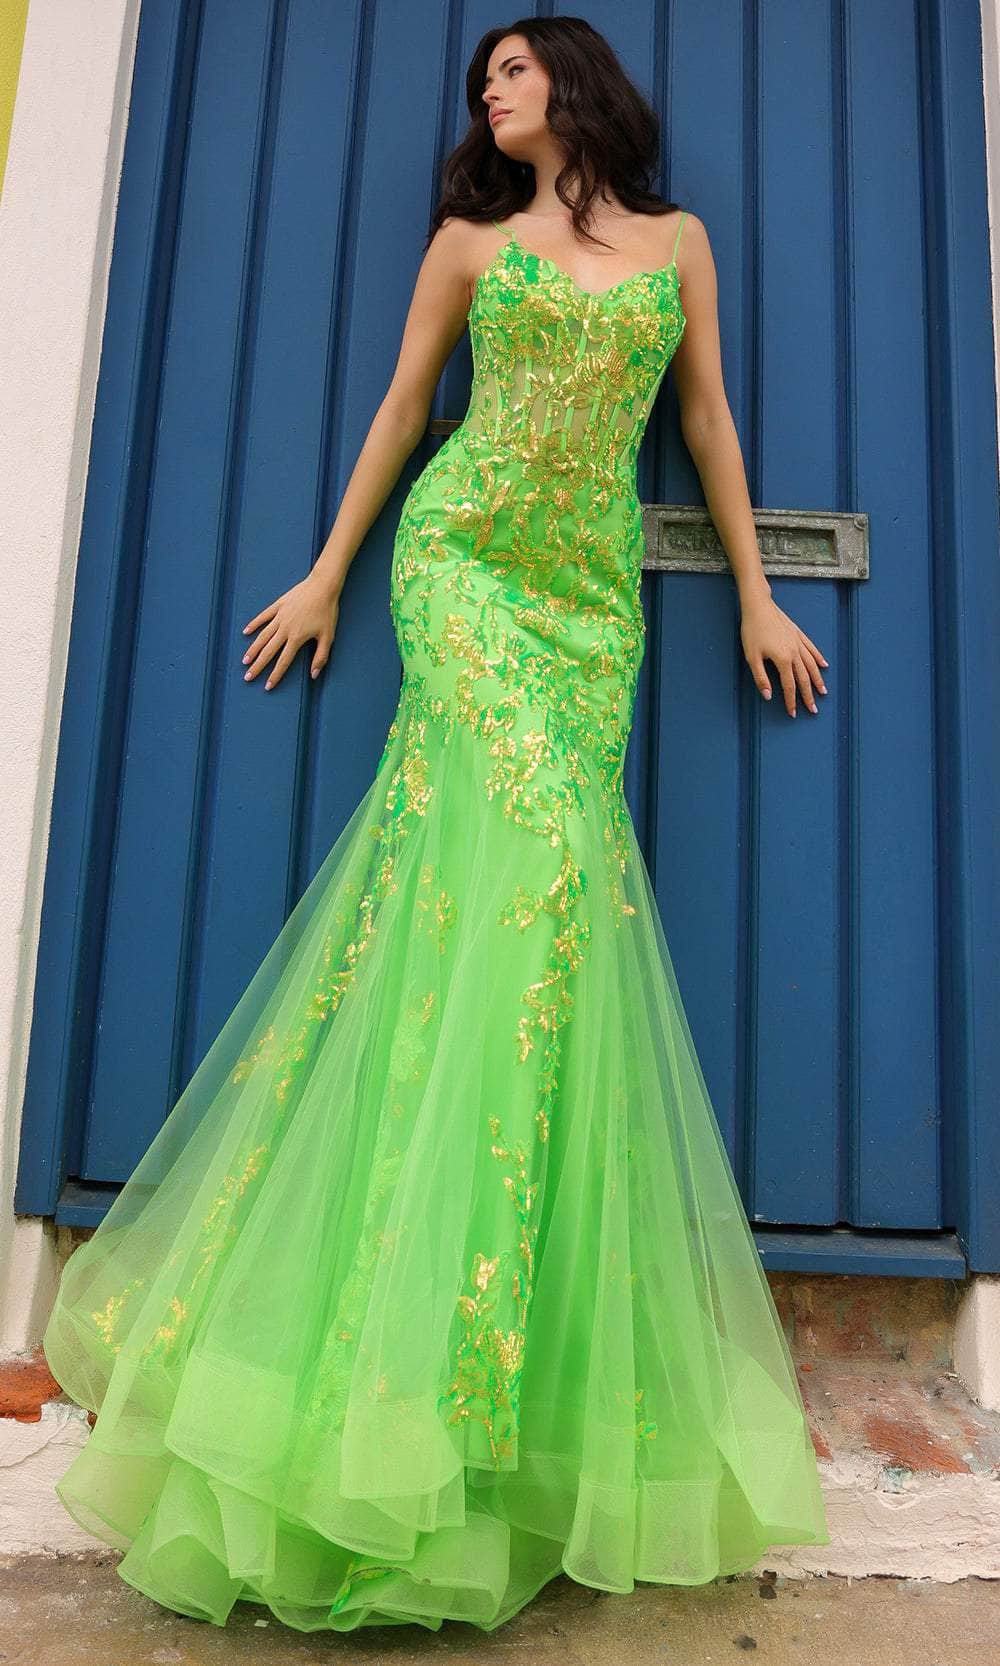 Nox Anabel Q1390 - Vibrant Corset Prom Dress Special Occasion Dress 0 / Neon Green